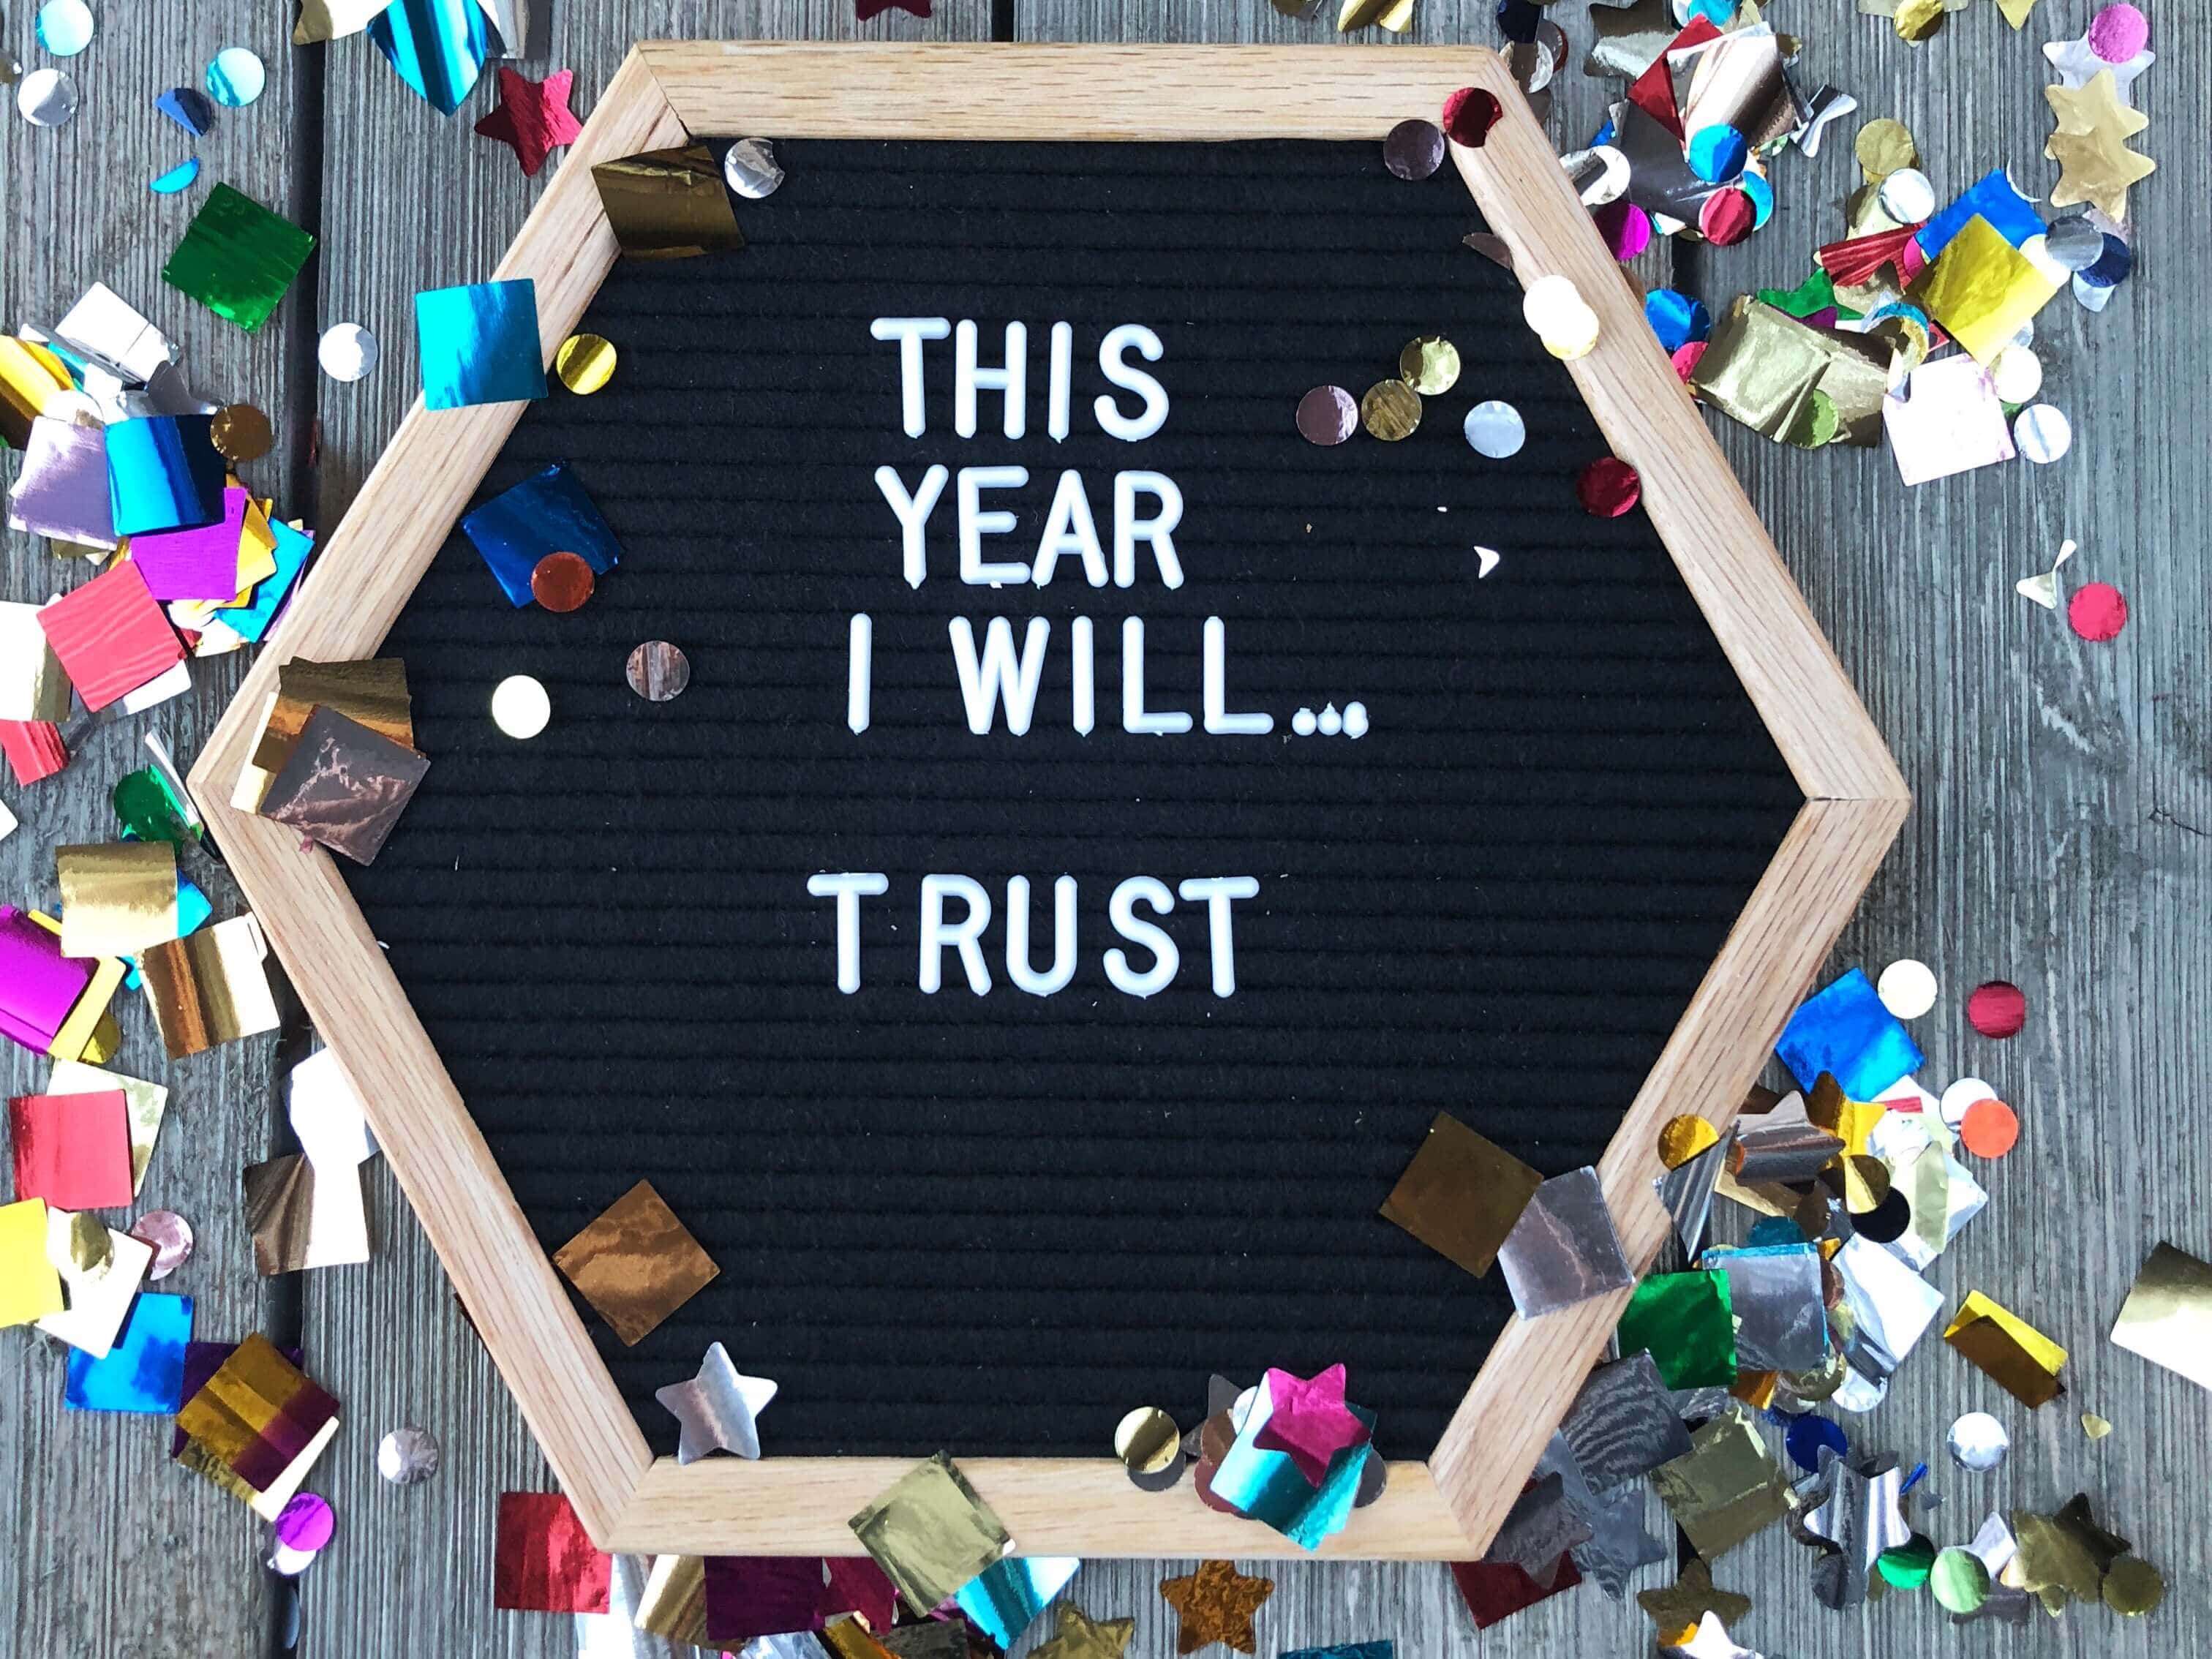 What is my one word instead of a new year's resolution this year? Trust.